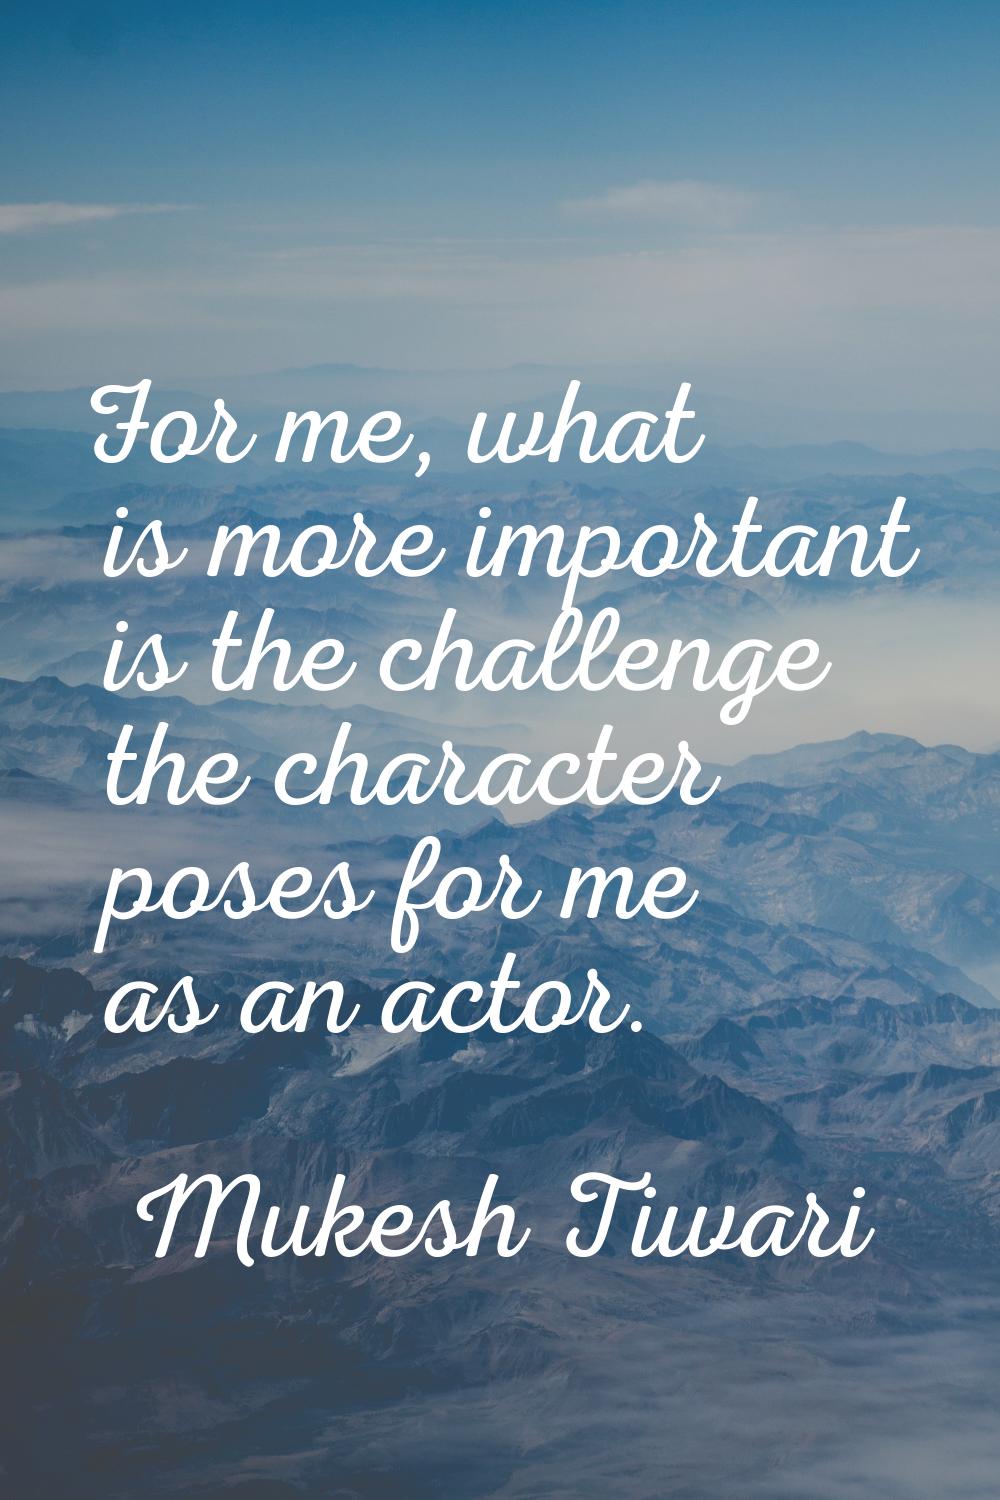 For me, what is more important is the challenge the character poses for me as an actor.